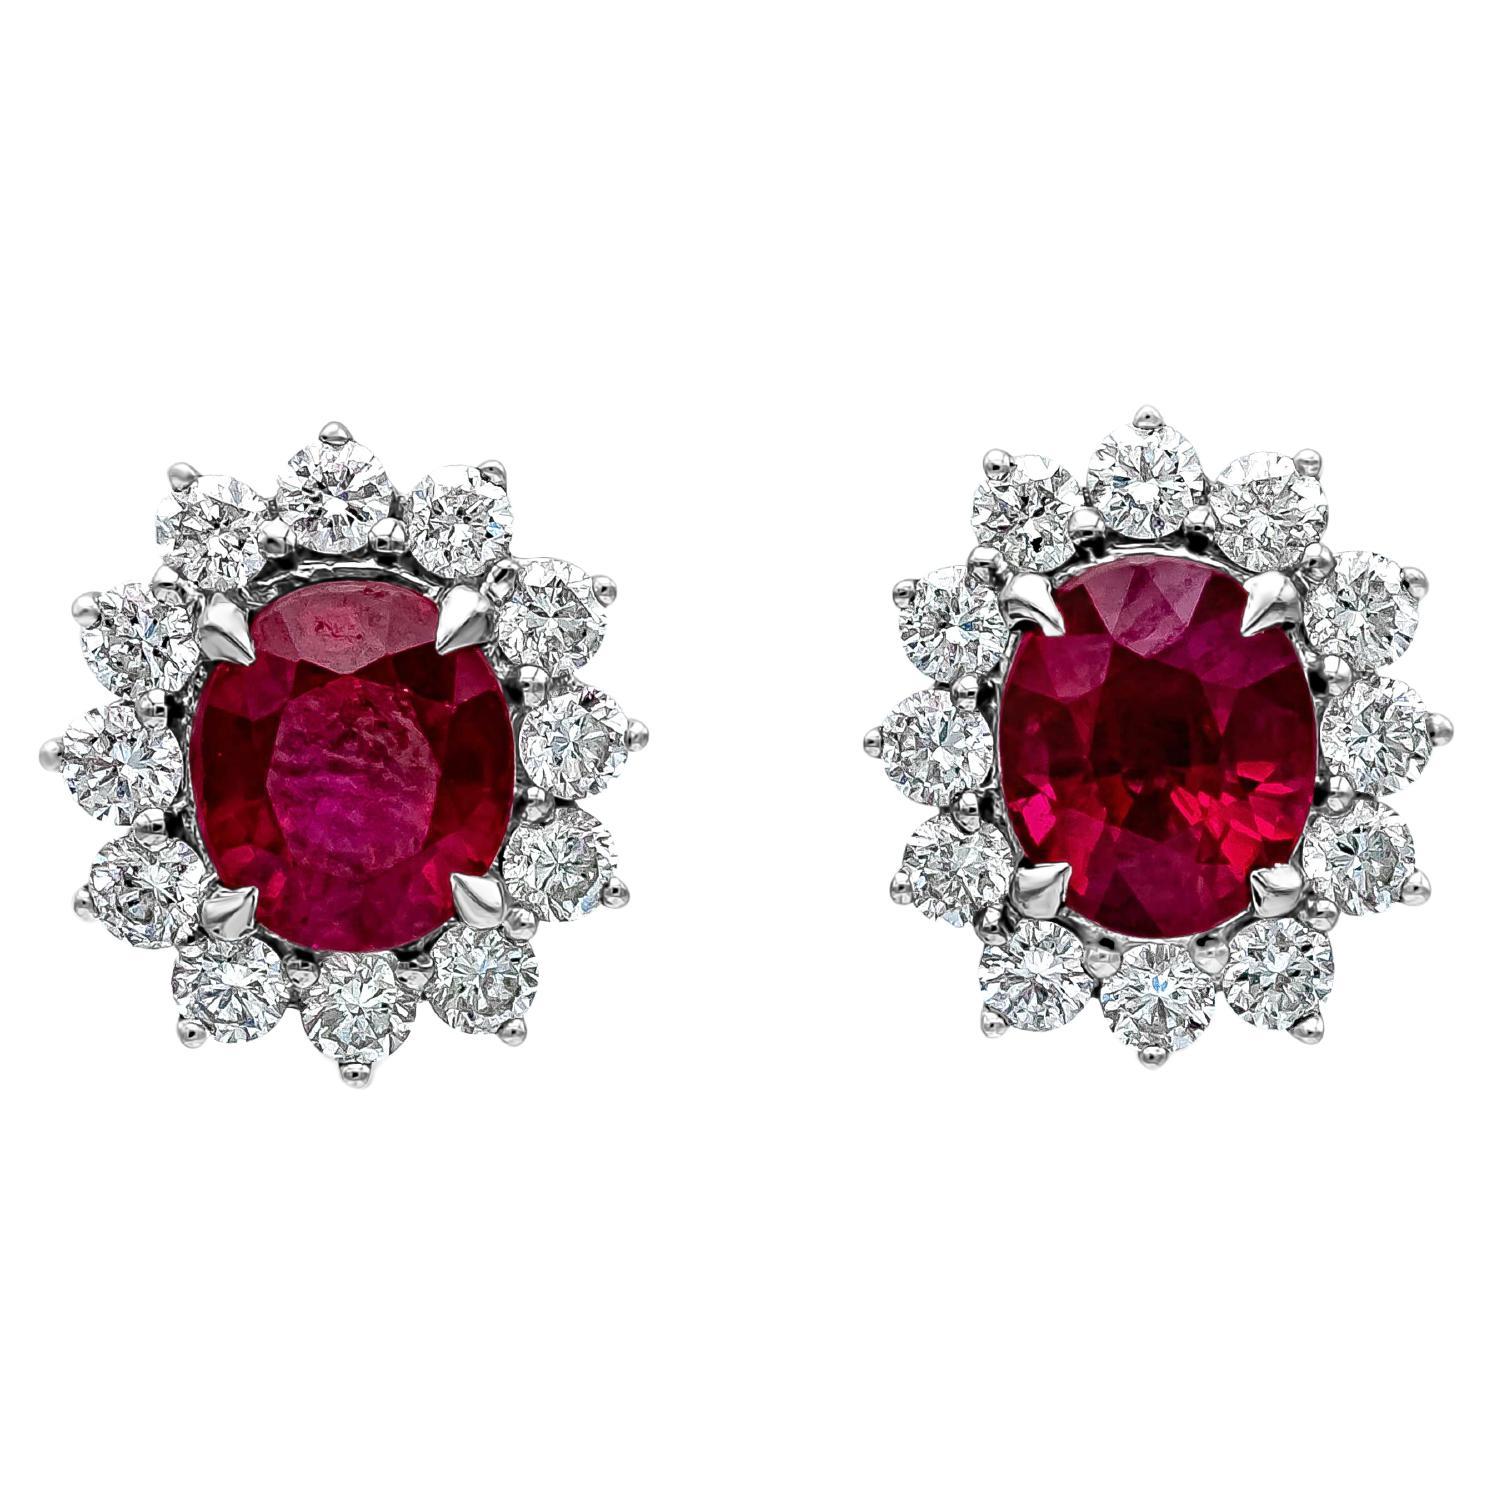 A classic pair of stud earrings showcasing vibrant red oval cut rubies, surrounded by a single row of round brilliant diamonds in a floral motif design. Rubies weigh 2.09 carats total, diamonds weigh 0.59 carats total. Made in 18K White Gold

Style